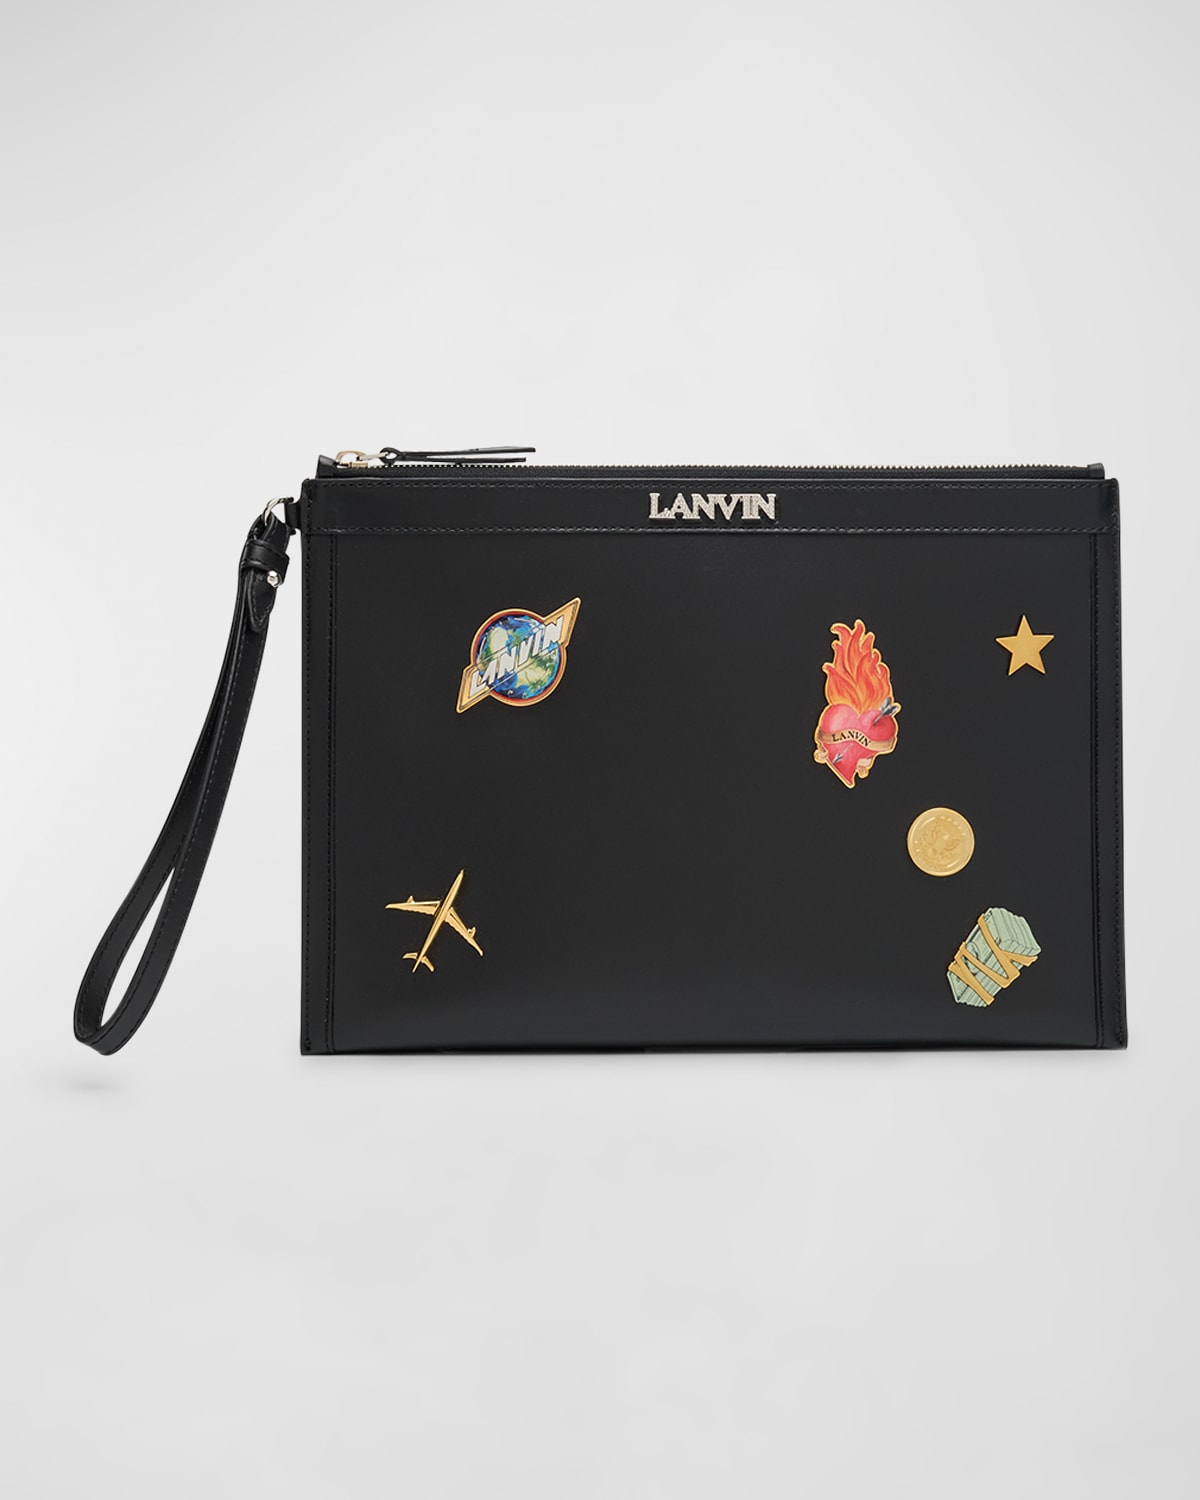 Lanvin Men's Leather Zip Pouch With Studs In 10s1 - Black/multico